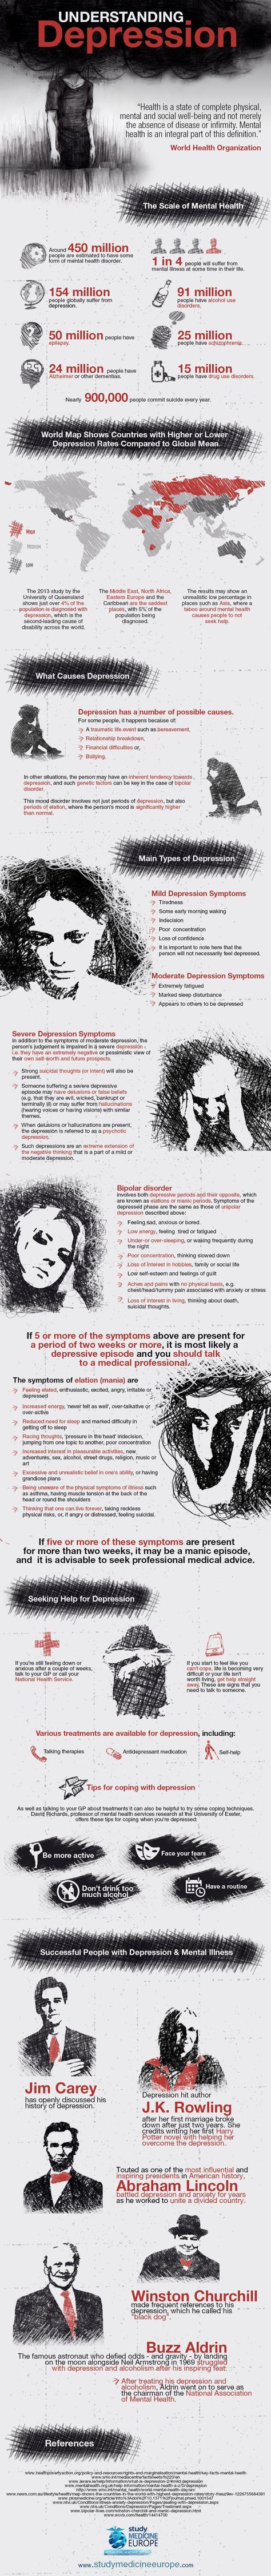 1558099954_79_Psychology-Infographic-An-Infographic-to-Help-You-Understand-Depression Psychology Infographic : An Infographic to Help You Understand Depression